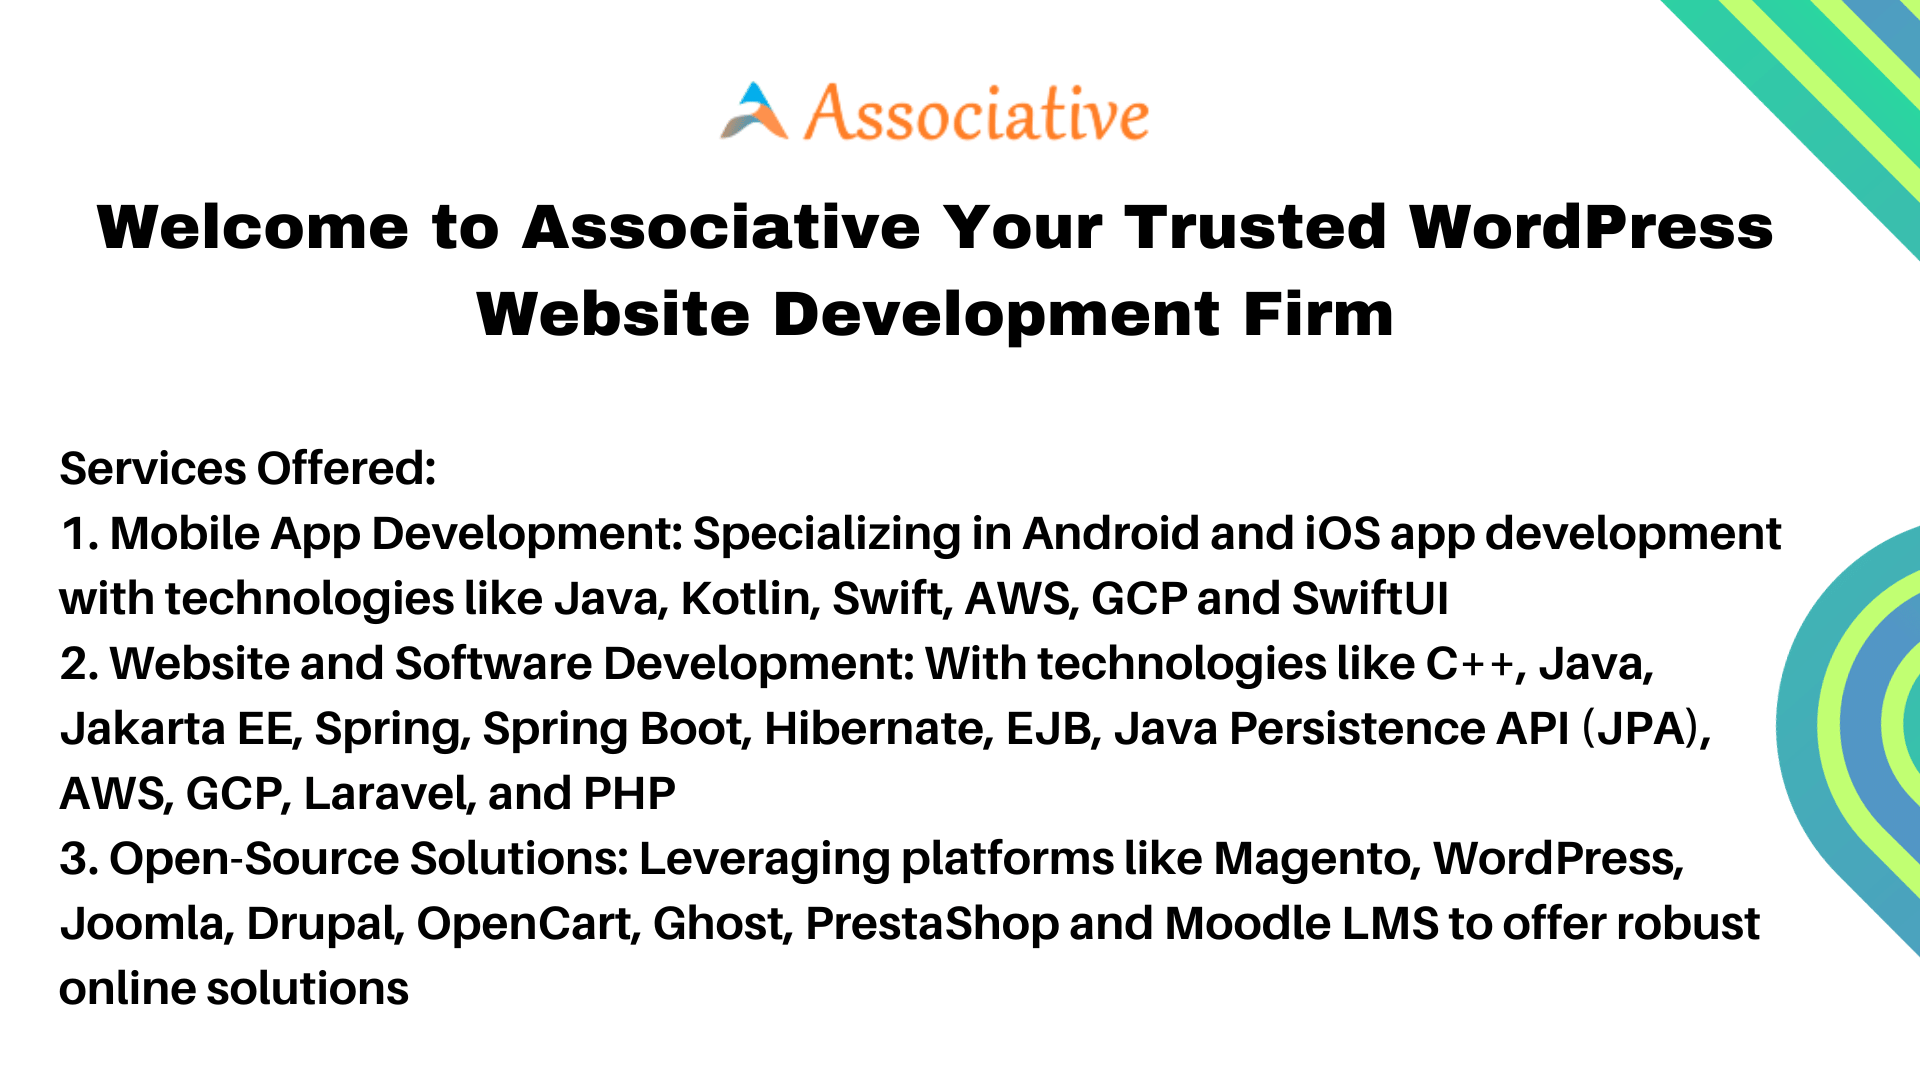 Welcome to Associative Your Trusted WordPress Website Development Firm